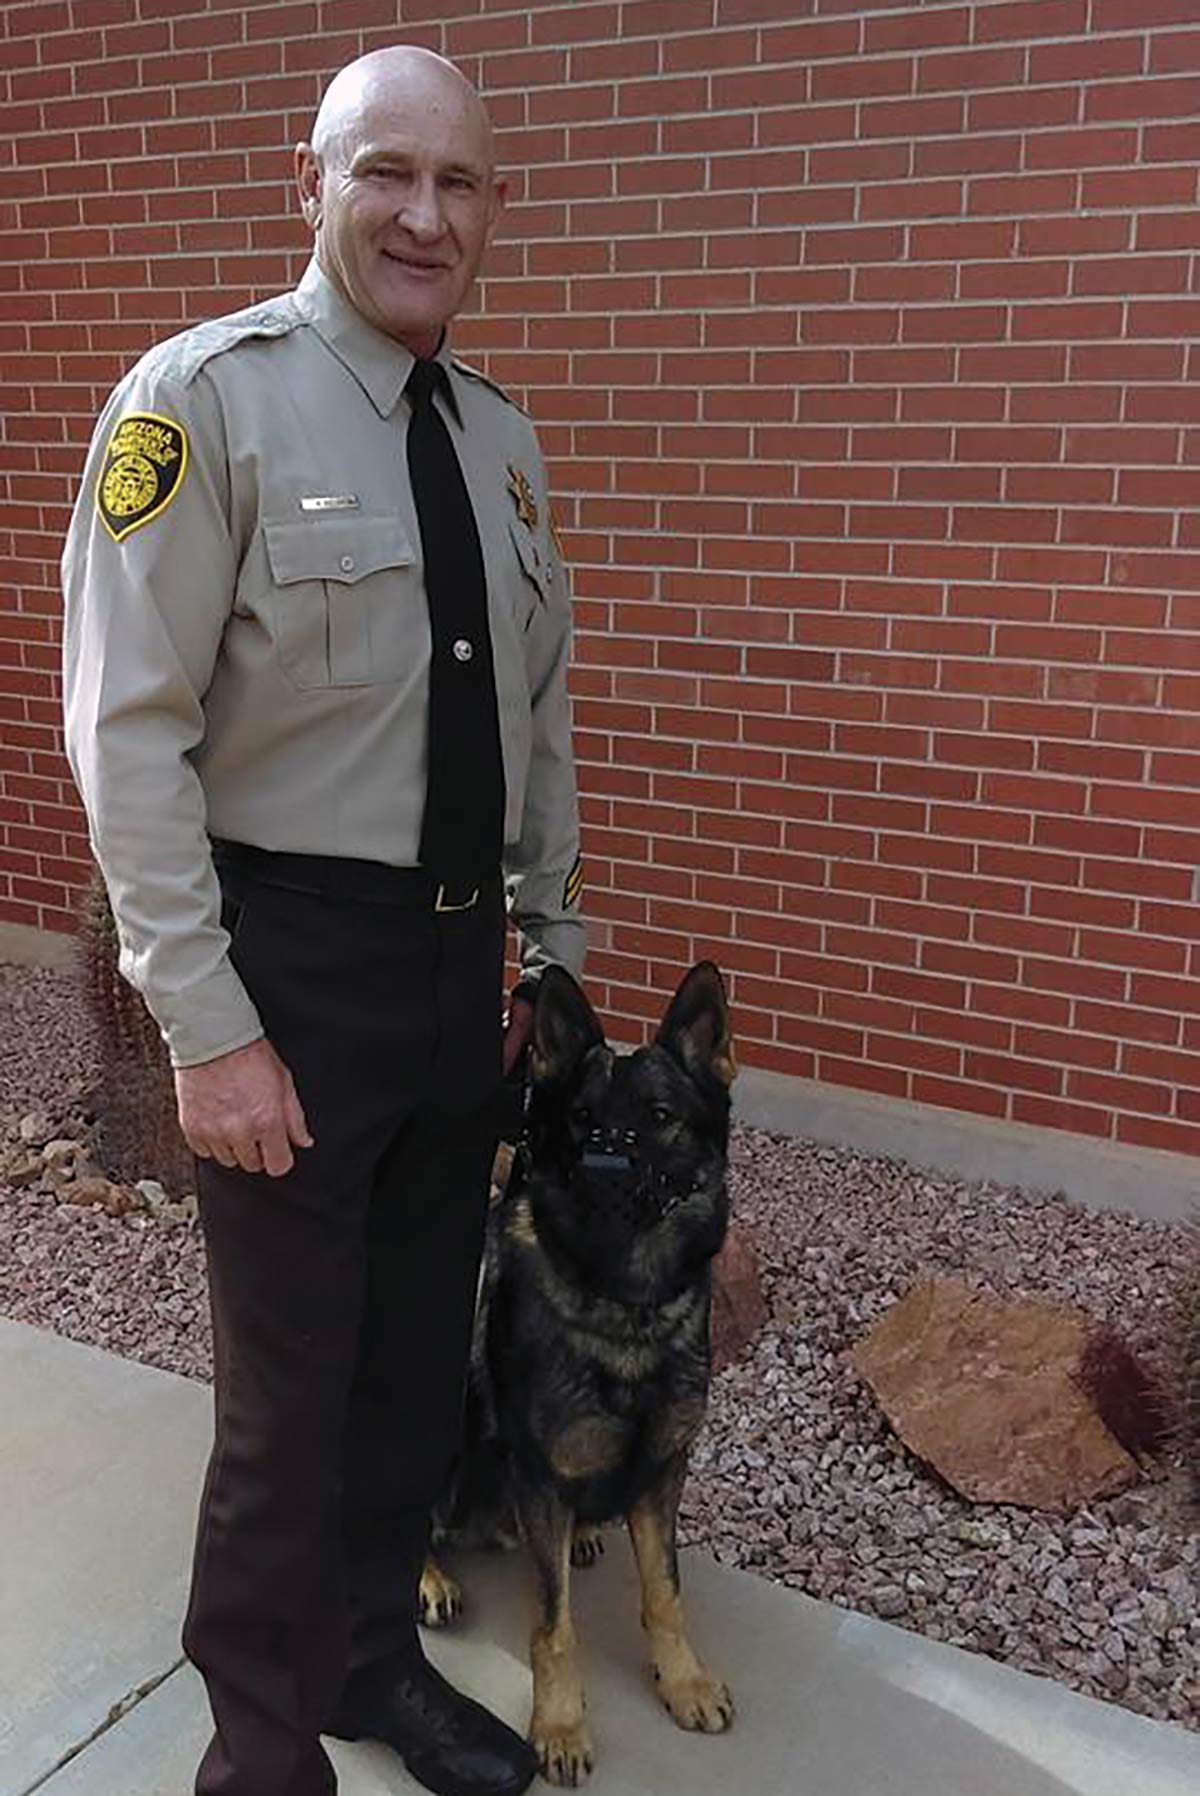 officer with canine by brick building